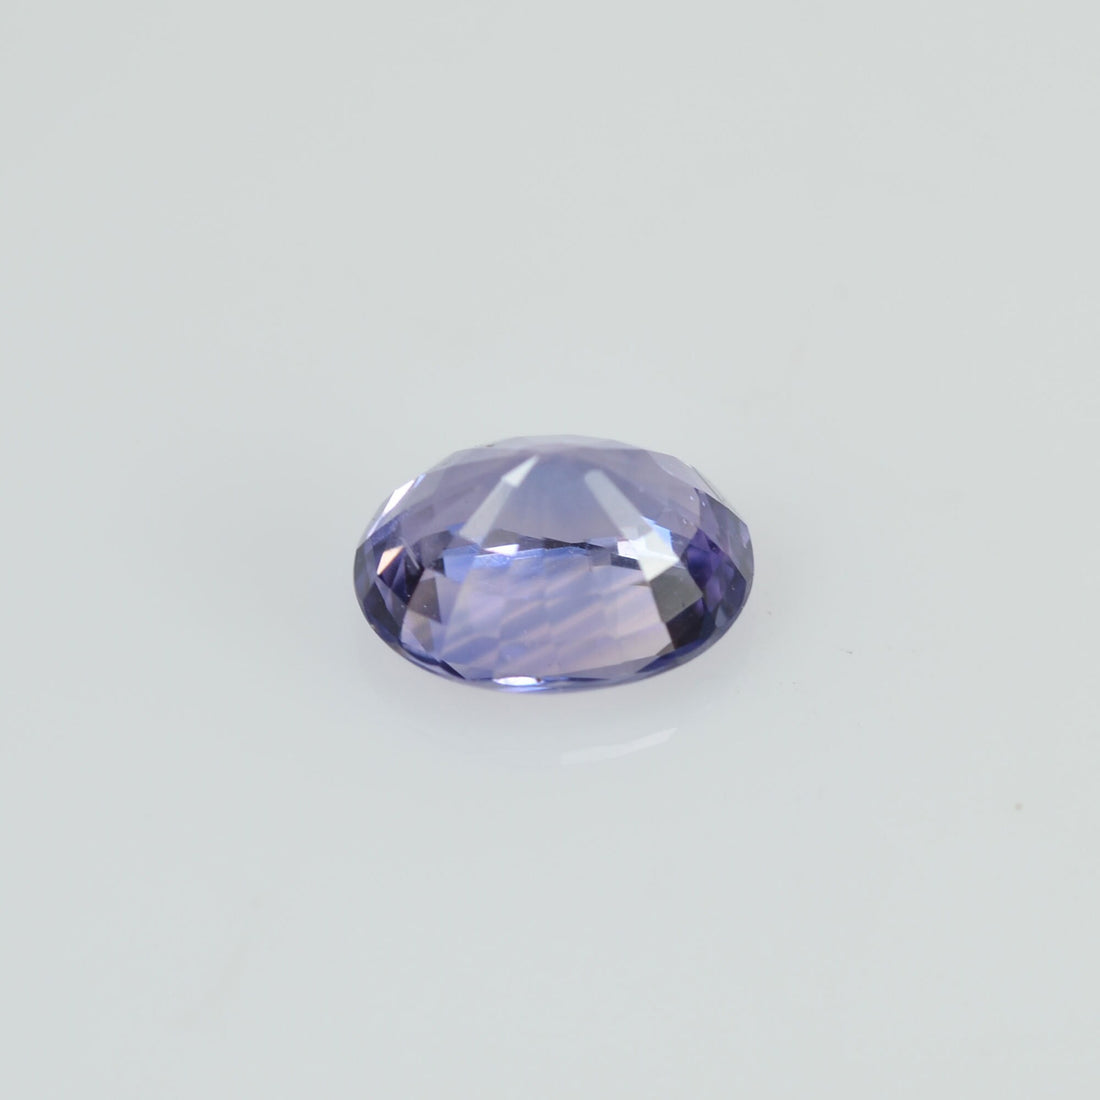 0.46 cts Natural Bi-color Sapphire Loose Gemstone Oval Cut